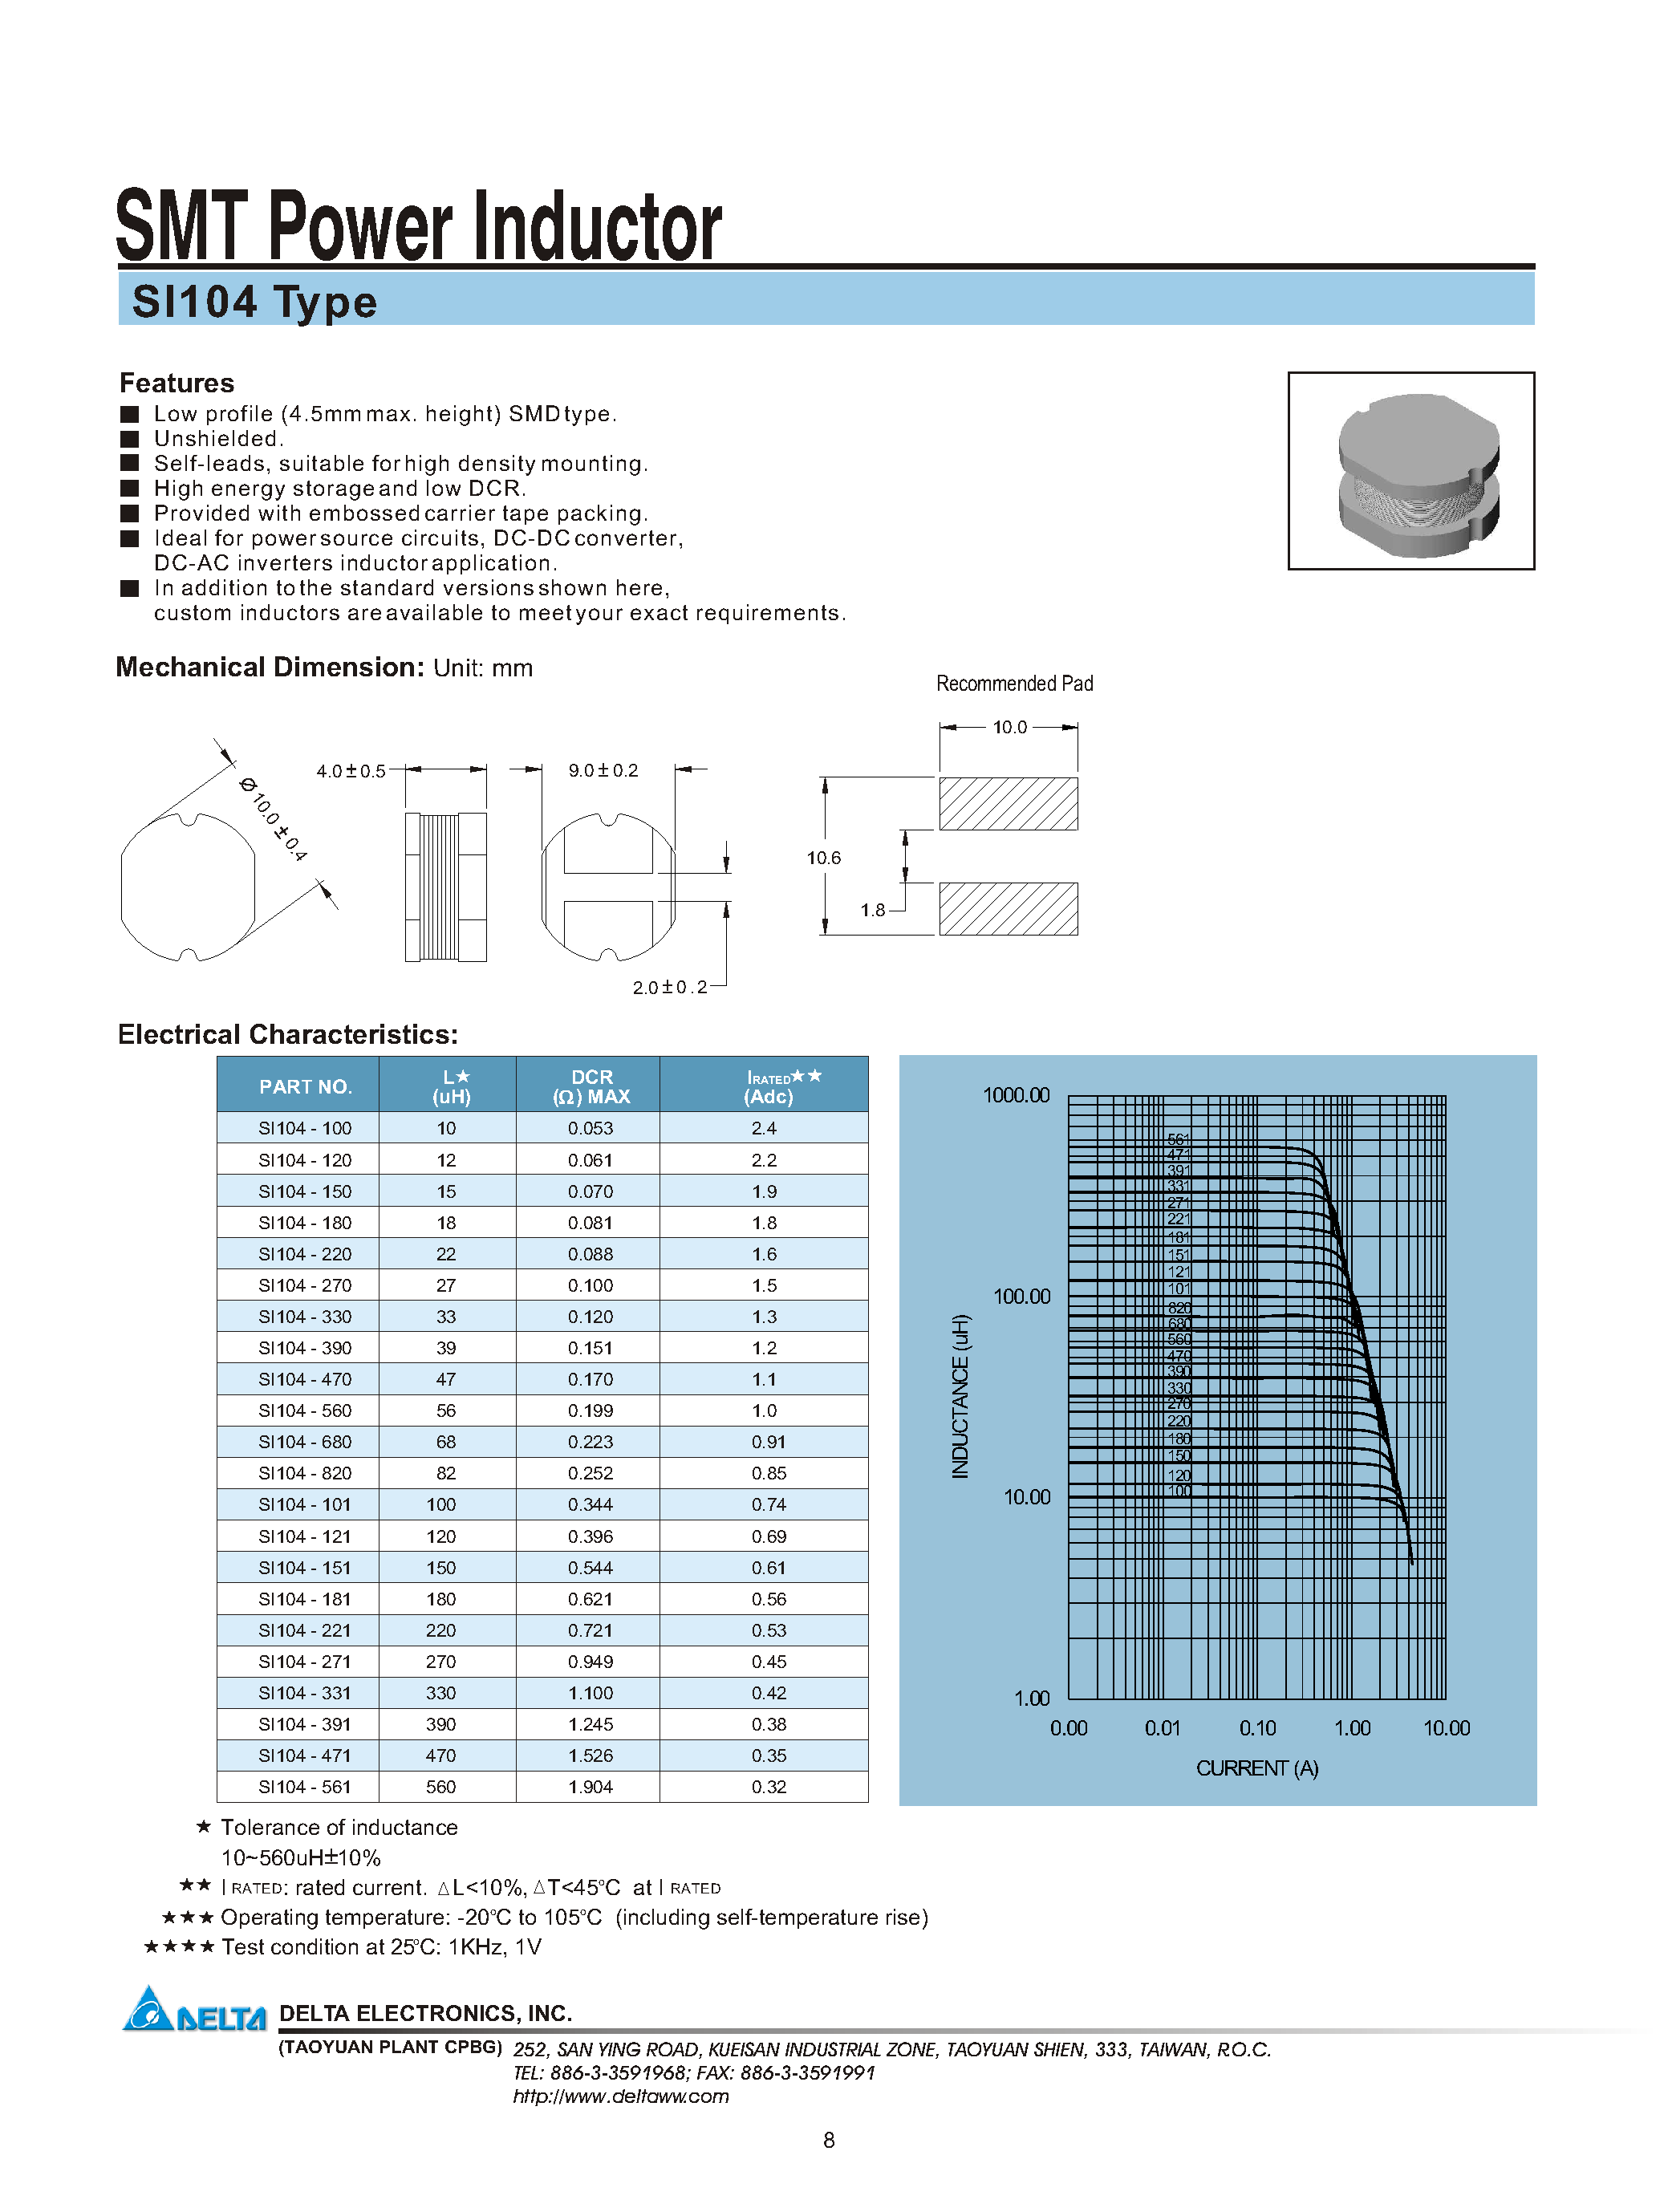 Datasheet SI104-151 - SMT Power Inductor page 1